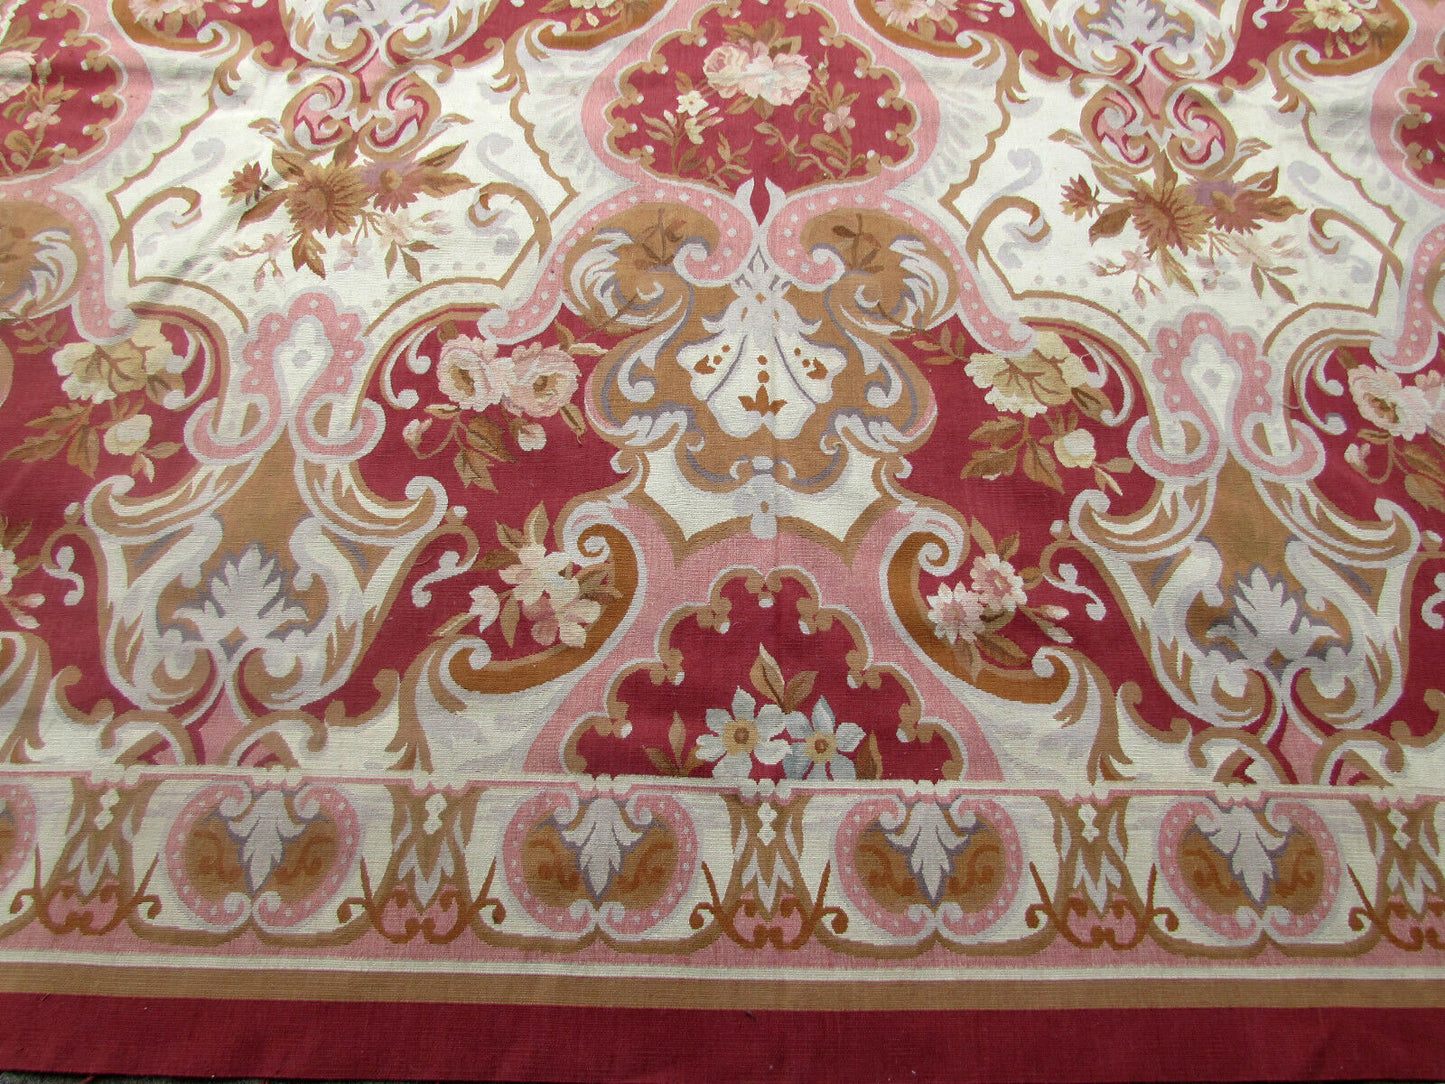 High-quality wool material of a Handmade Vintage French Aubusson Rug